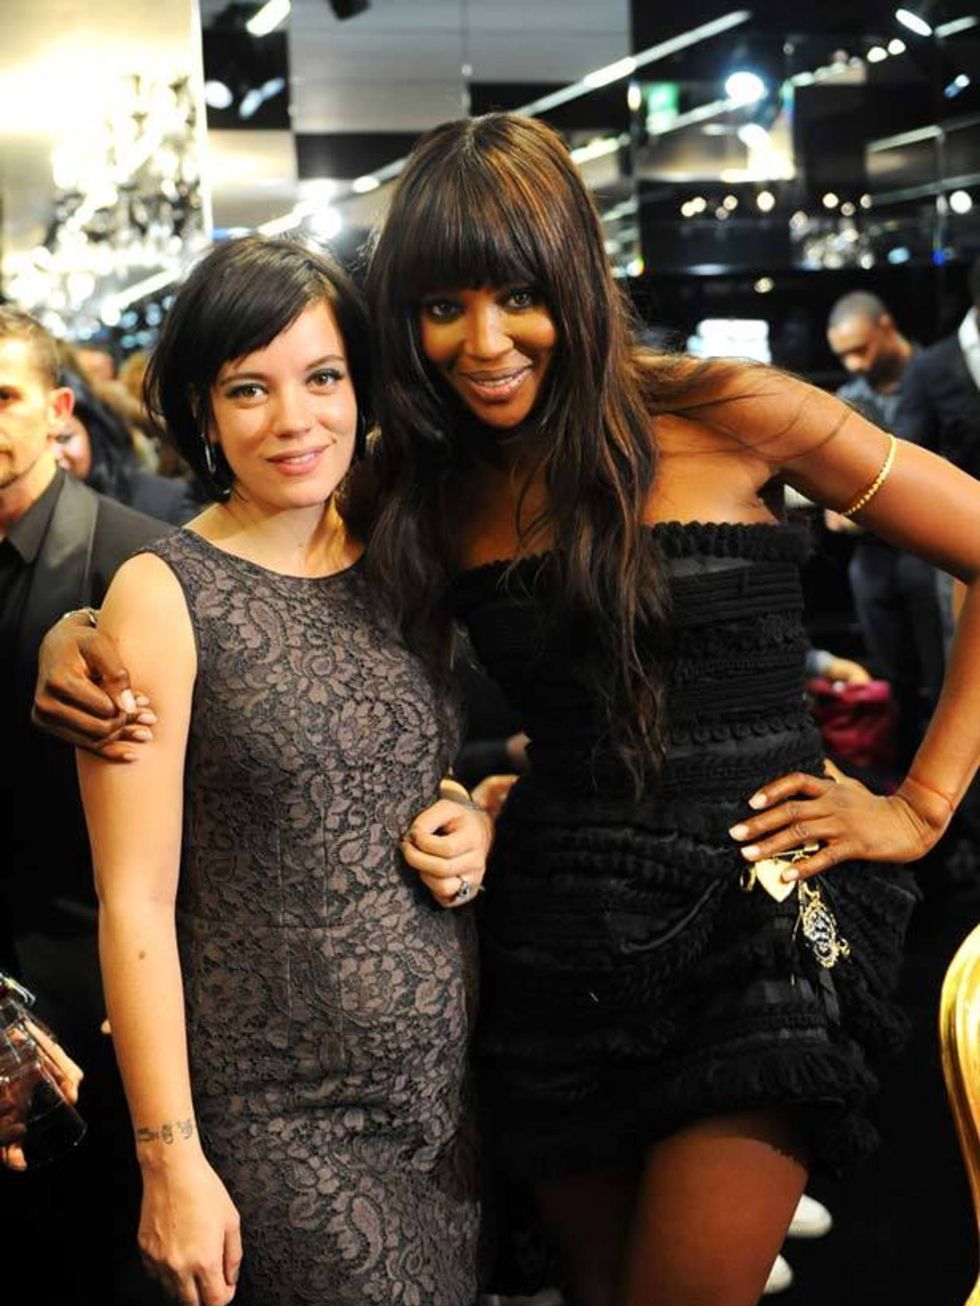 <p><a href="http://www.elleuk.com/starstyle/style-files/%28section%29/naomi-campbell/%28offset%29/0/%28img%29/469627">Naomi Campbell</a> &amp; <a href="http://www.elleuk.com/starstyle/style-files/%28section%29/lily-allen/%28offset%29/12/%28img%29/338898">